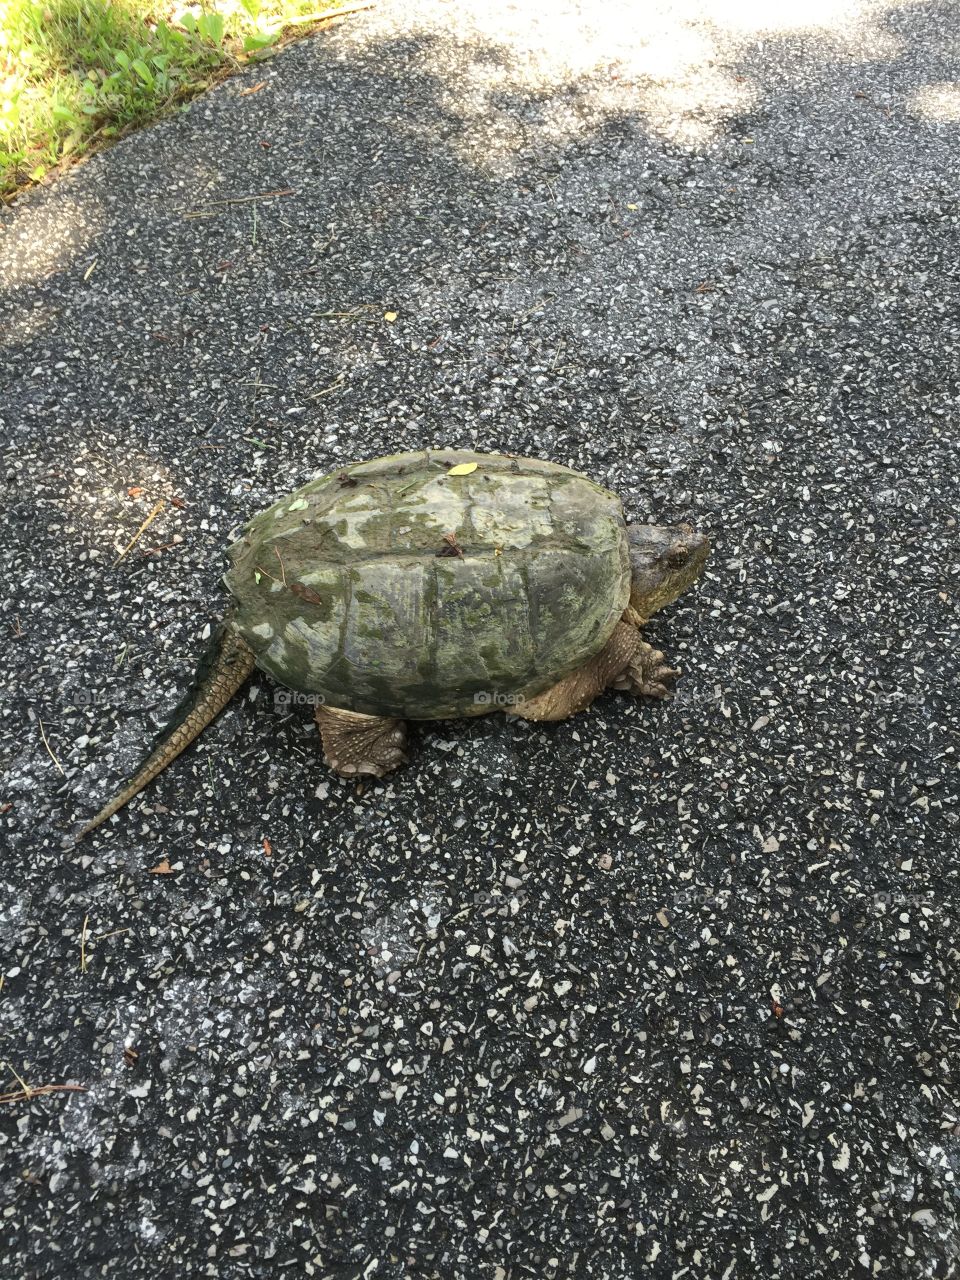 Snapping turtle 